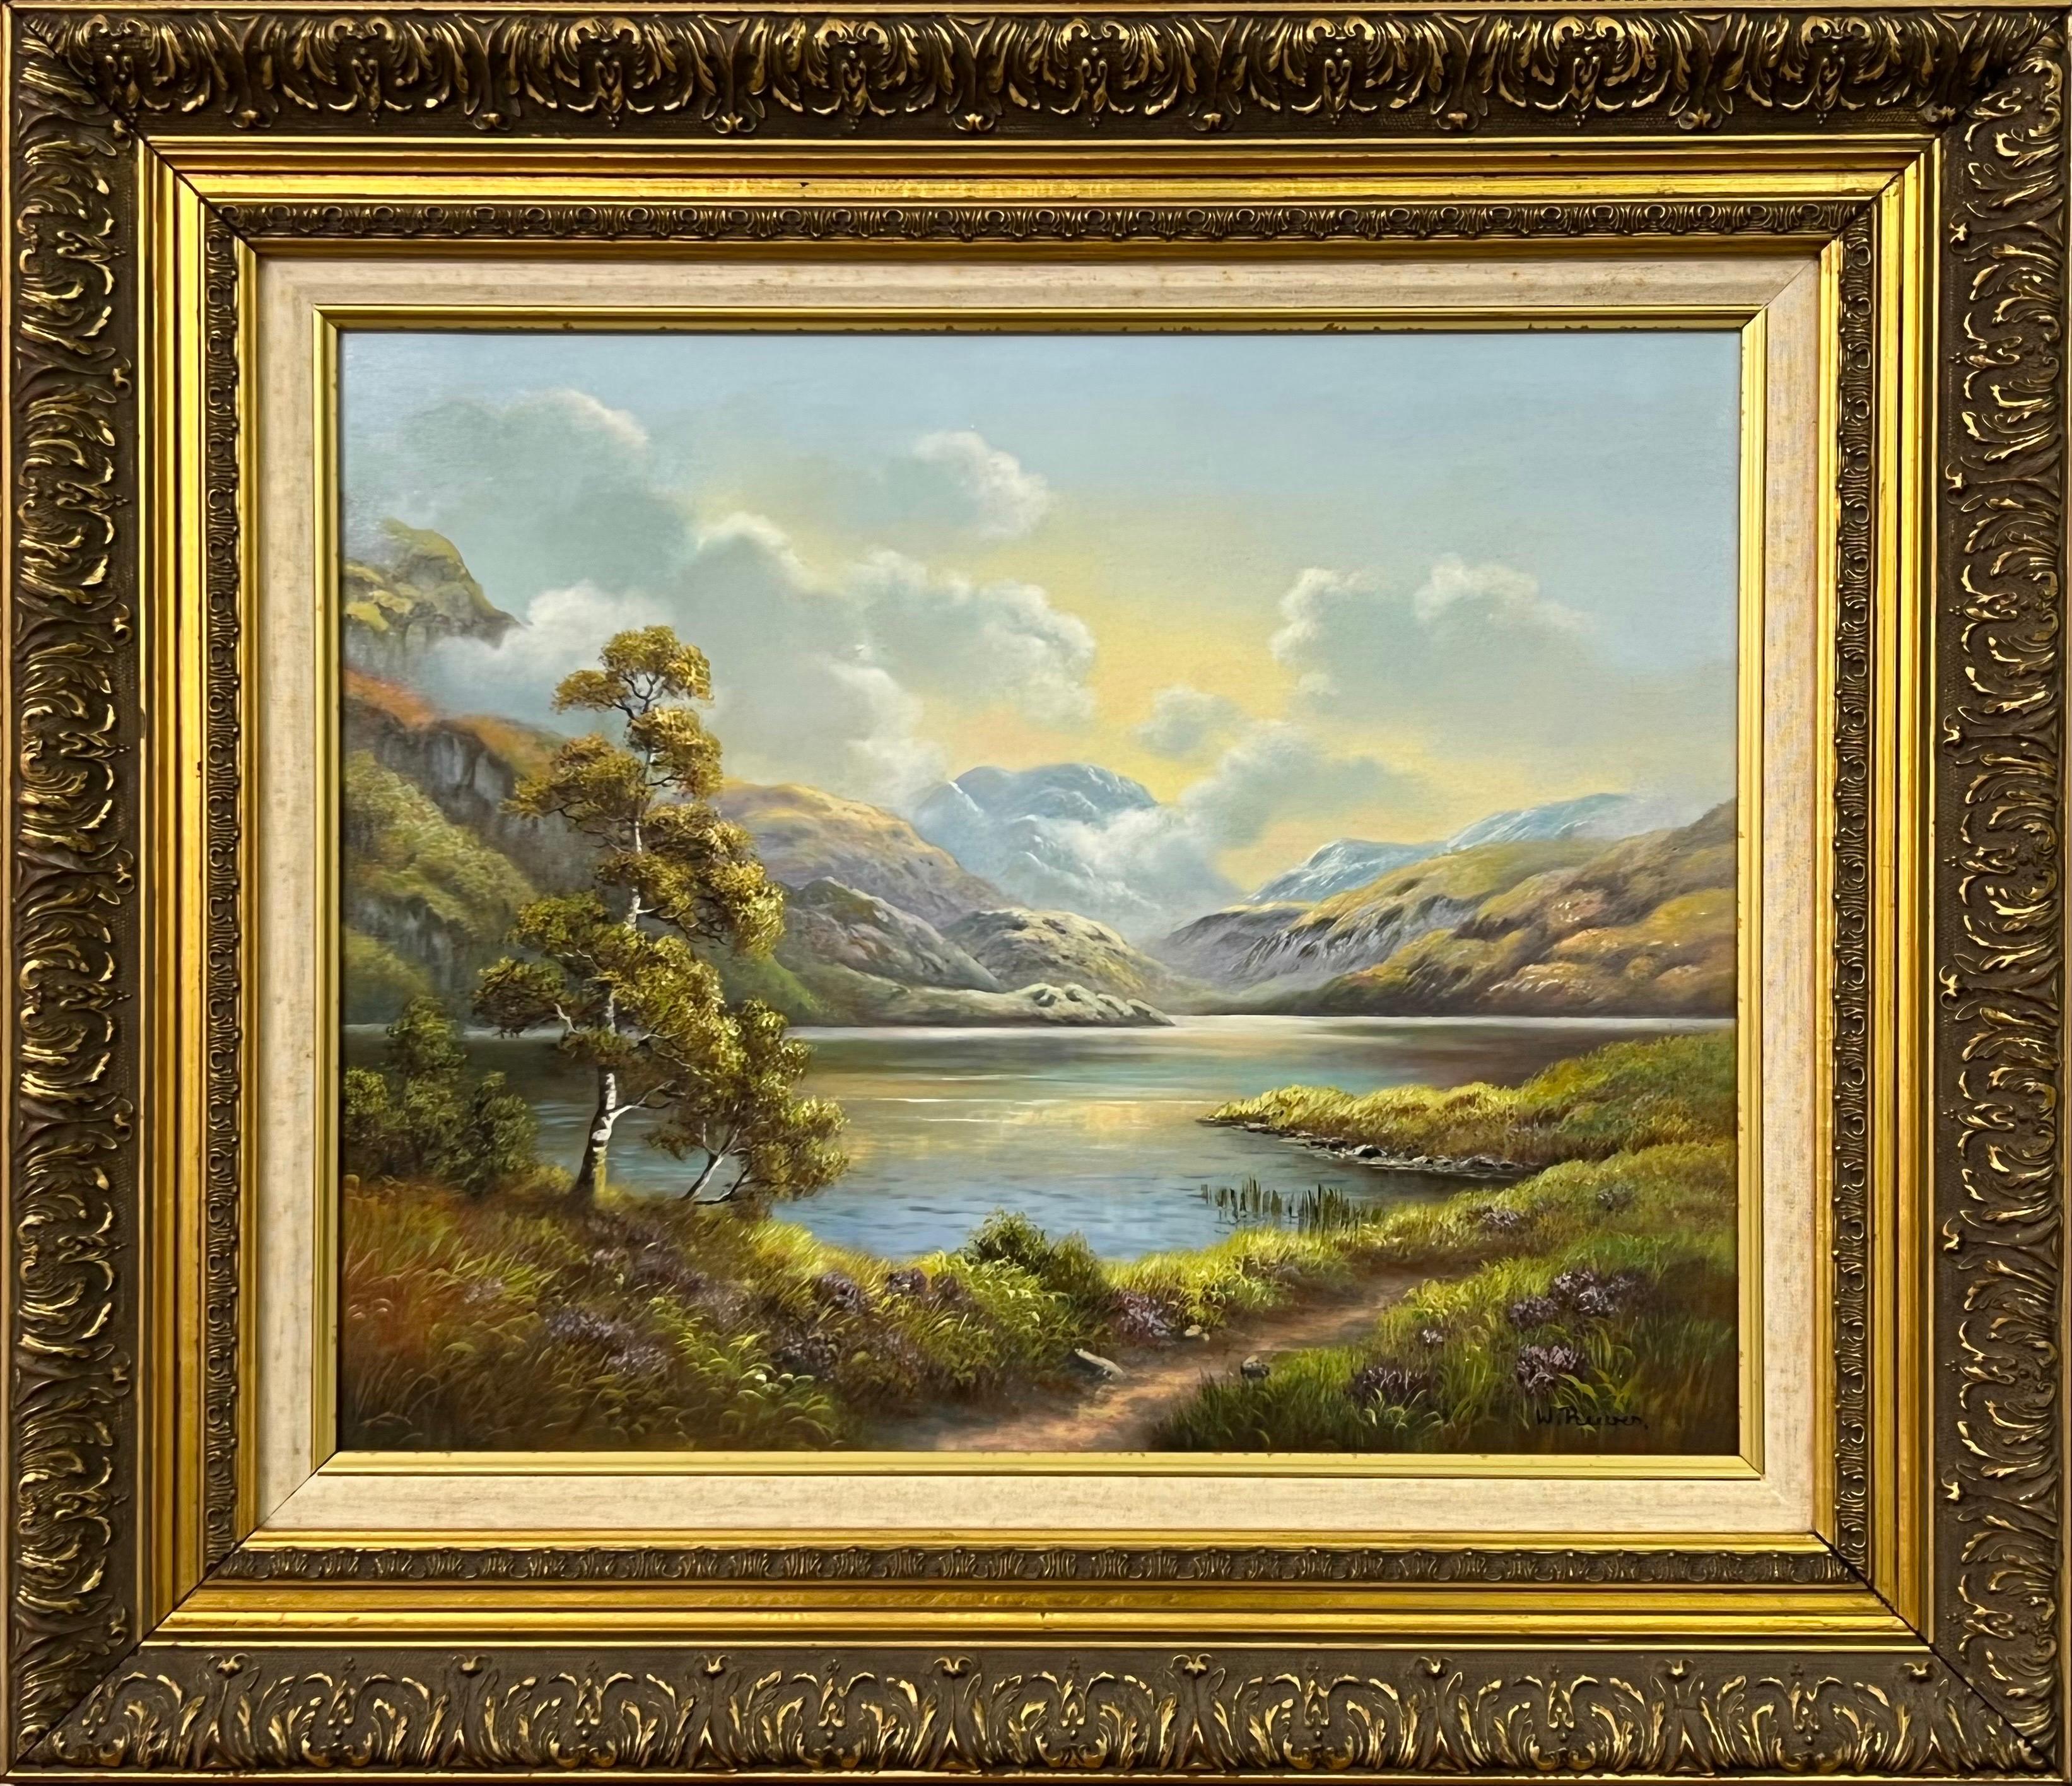 Wendy Reeves Figurative Painting - Oil Painting of Loch in the Scottish Highlands by 20th Century British Artist